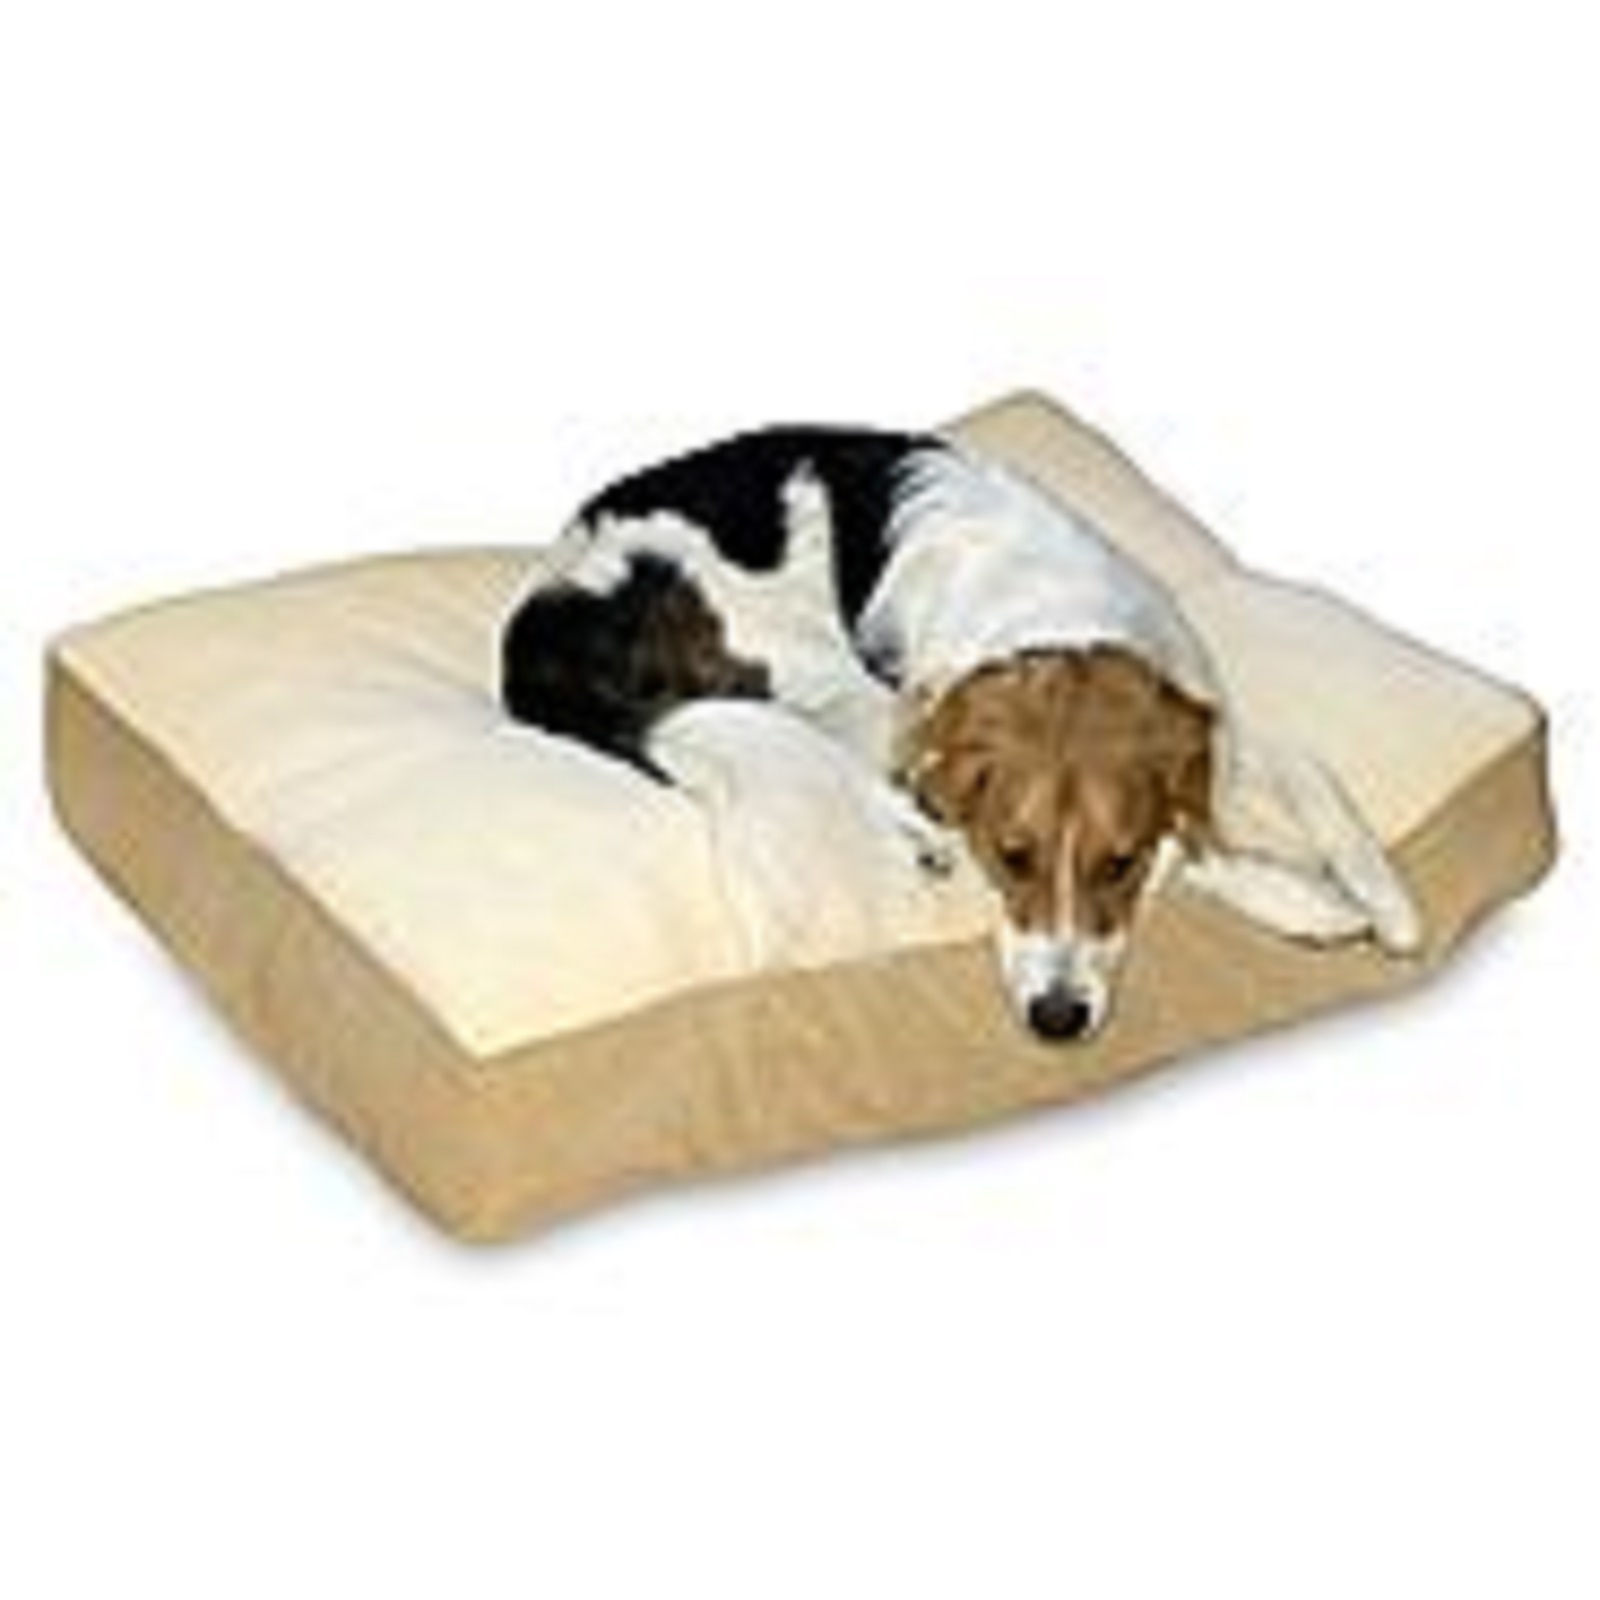 Happy Hounds Buster Dog Bed - Extra Small (18 x 24") - Tan Stripe/Sherpa